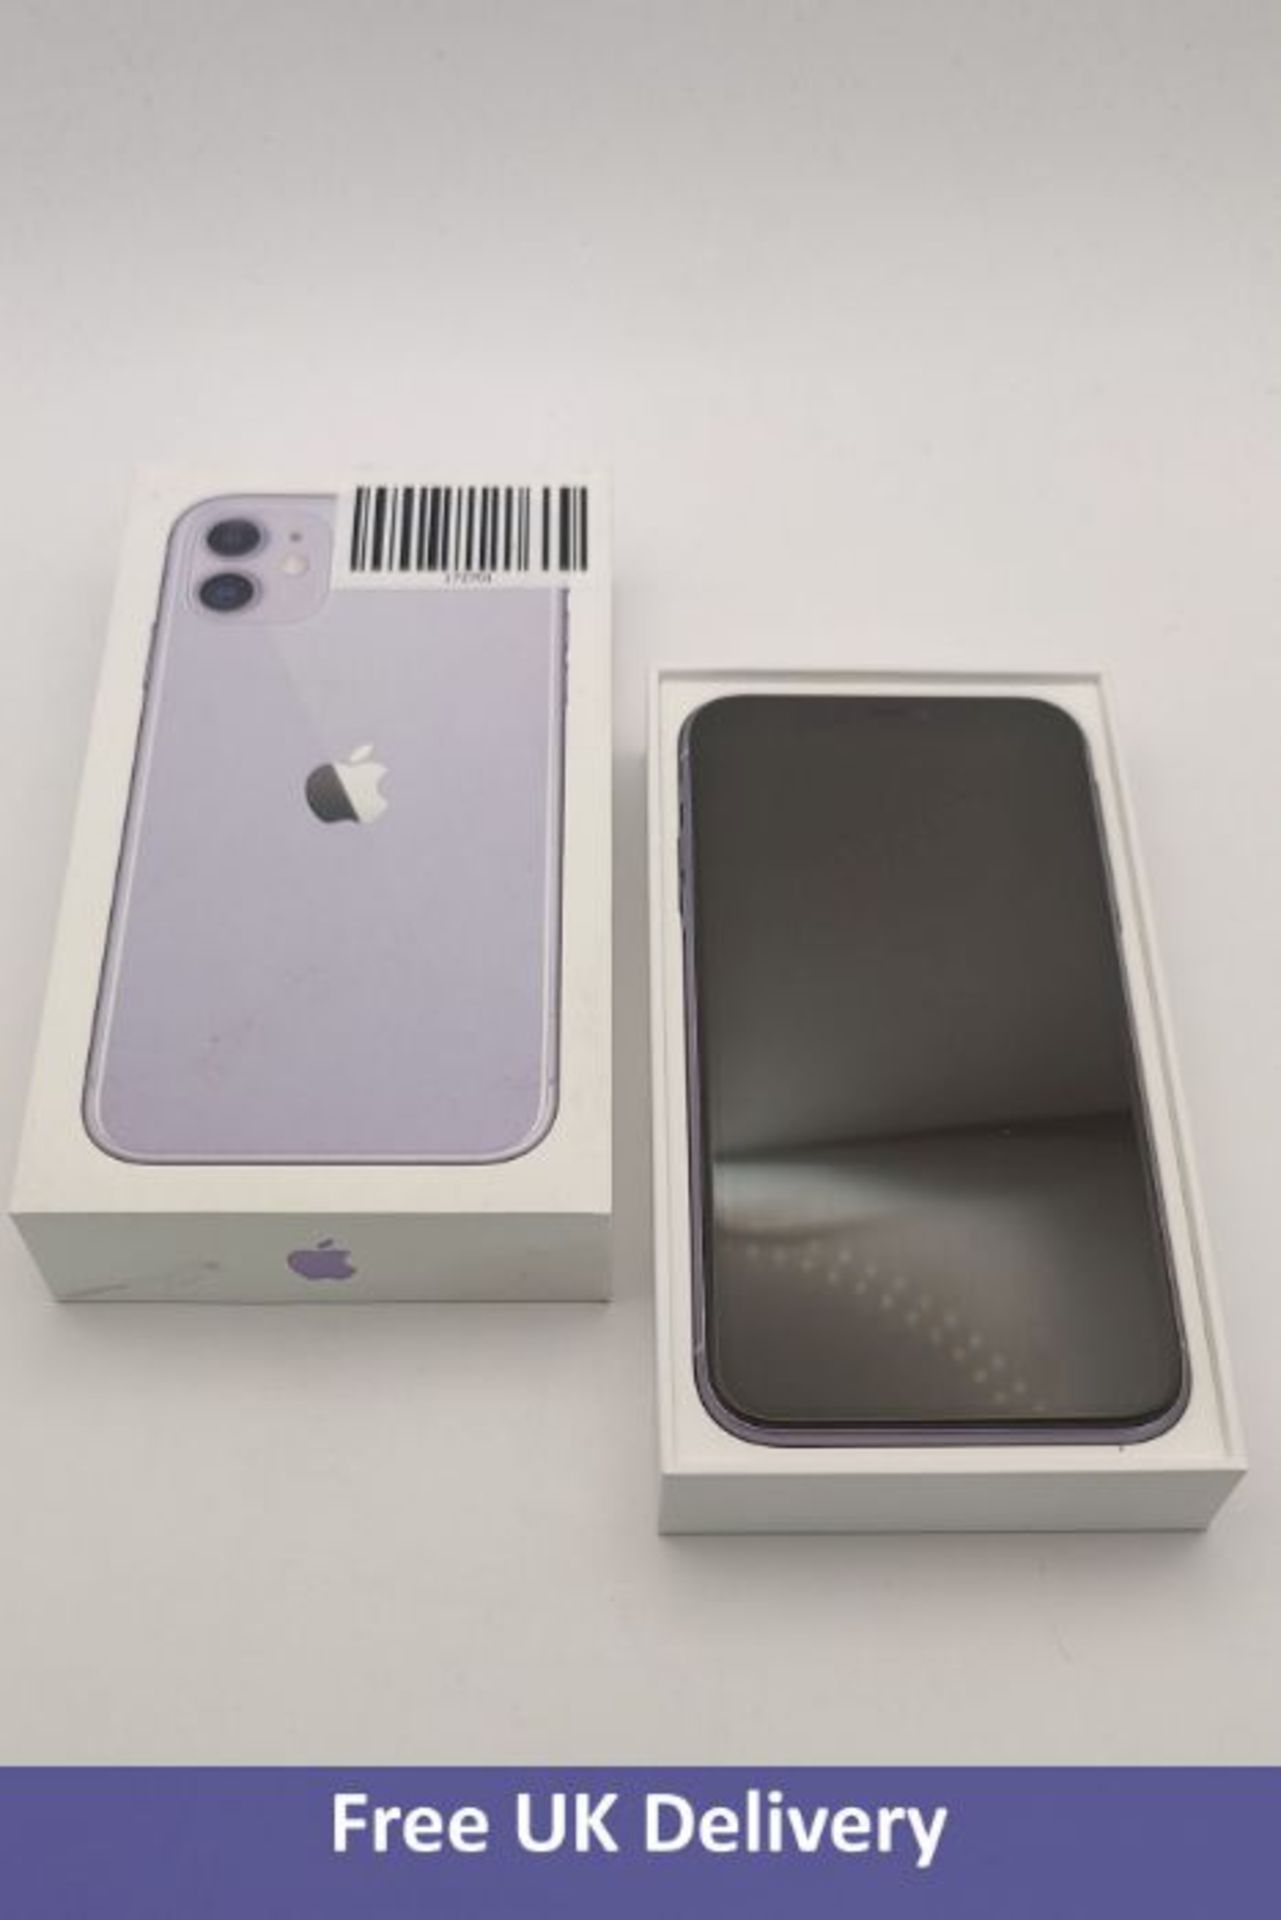 Apple iPhone 11 128GB, Purple, A2221/MHDM3B/A. Used, pristine condition like new, boxed with accesso